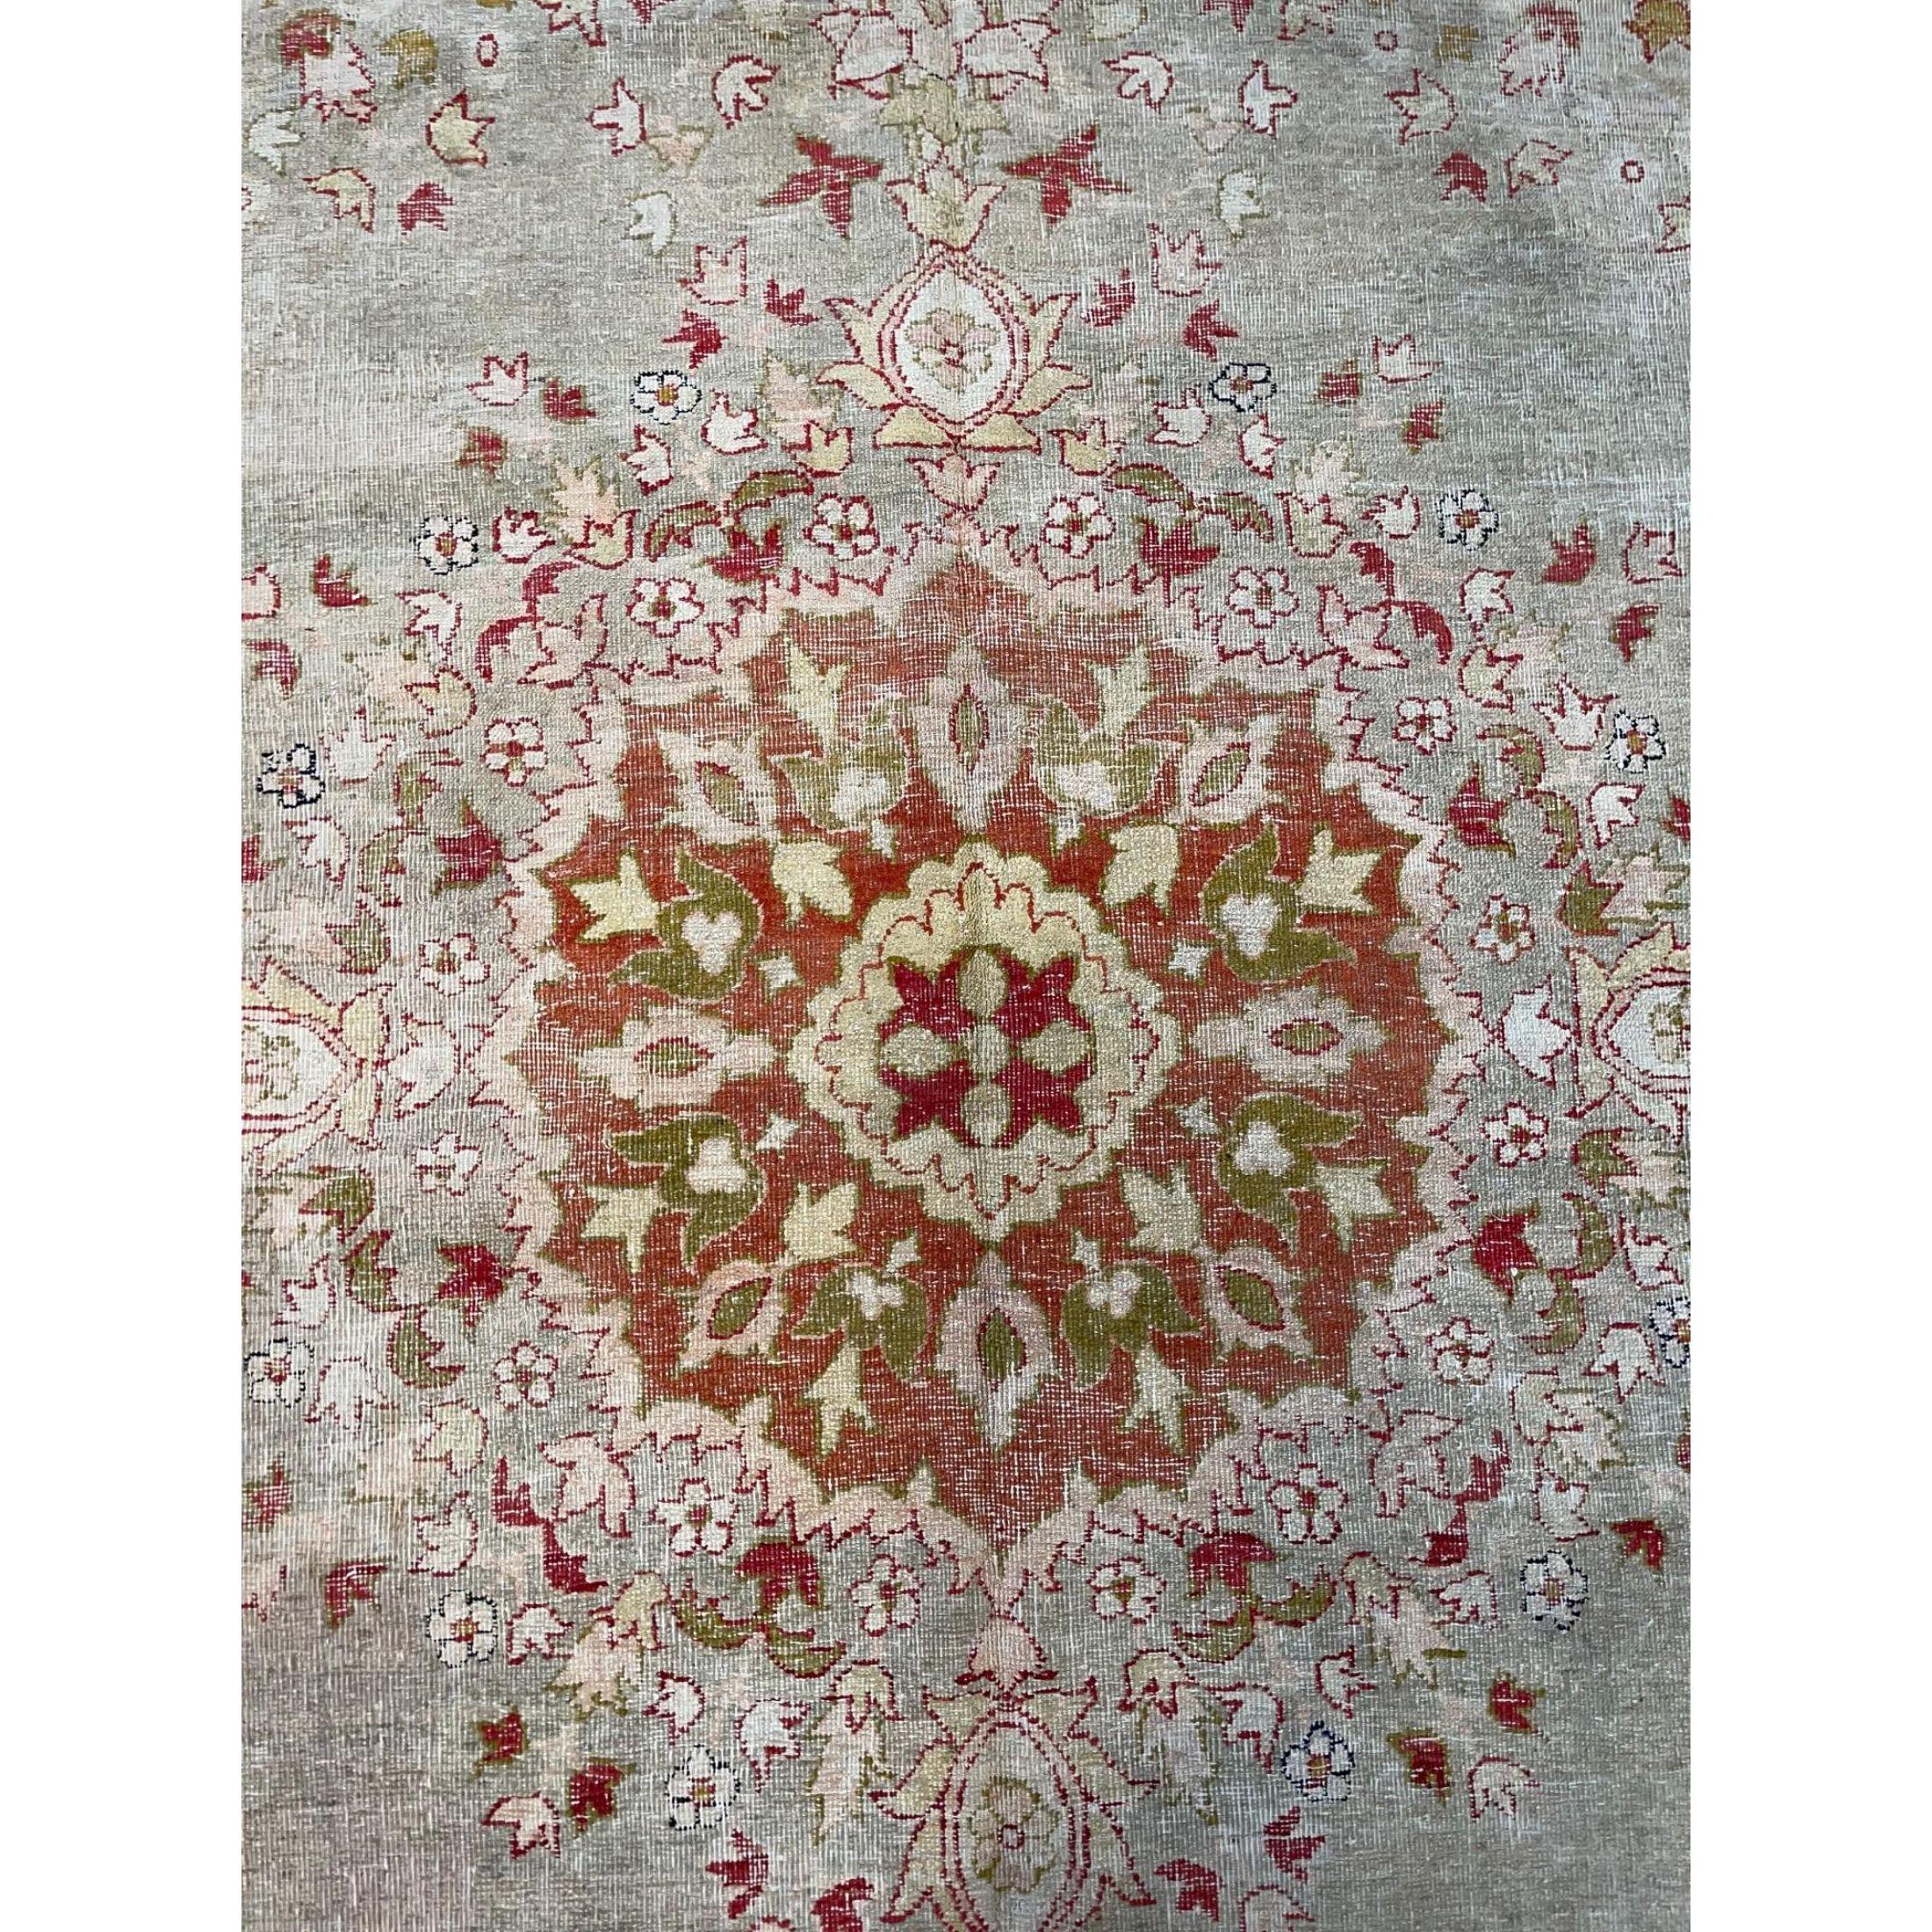 Empire 1900s Antique Indian Amritsar Rug - 10'6'' X 7'9'' For Sale